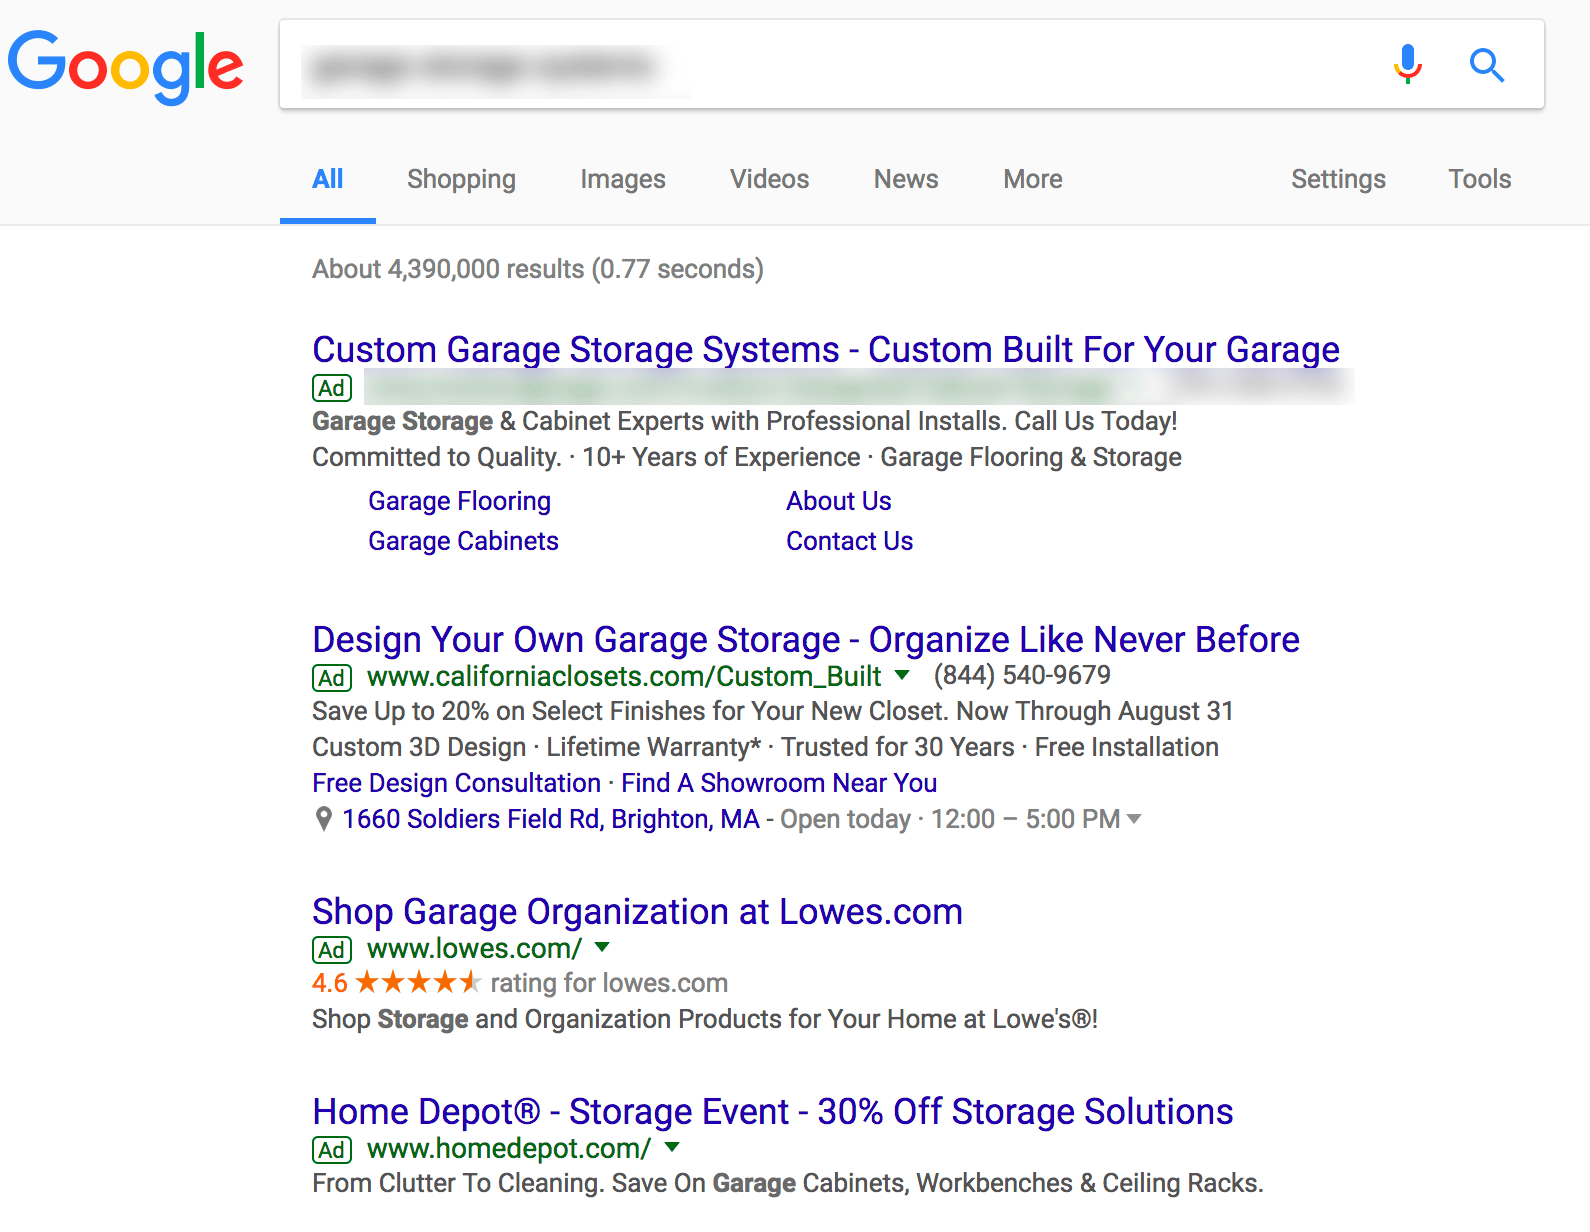 Competing Against Big-Brand Advertisers in PPC